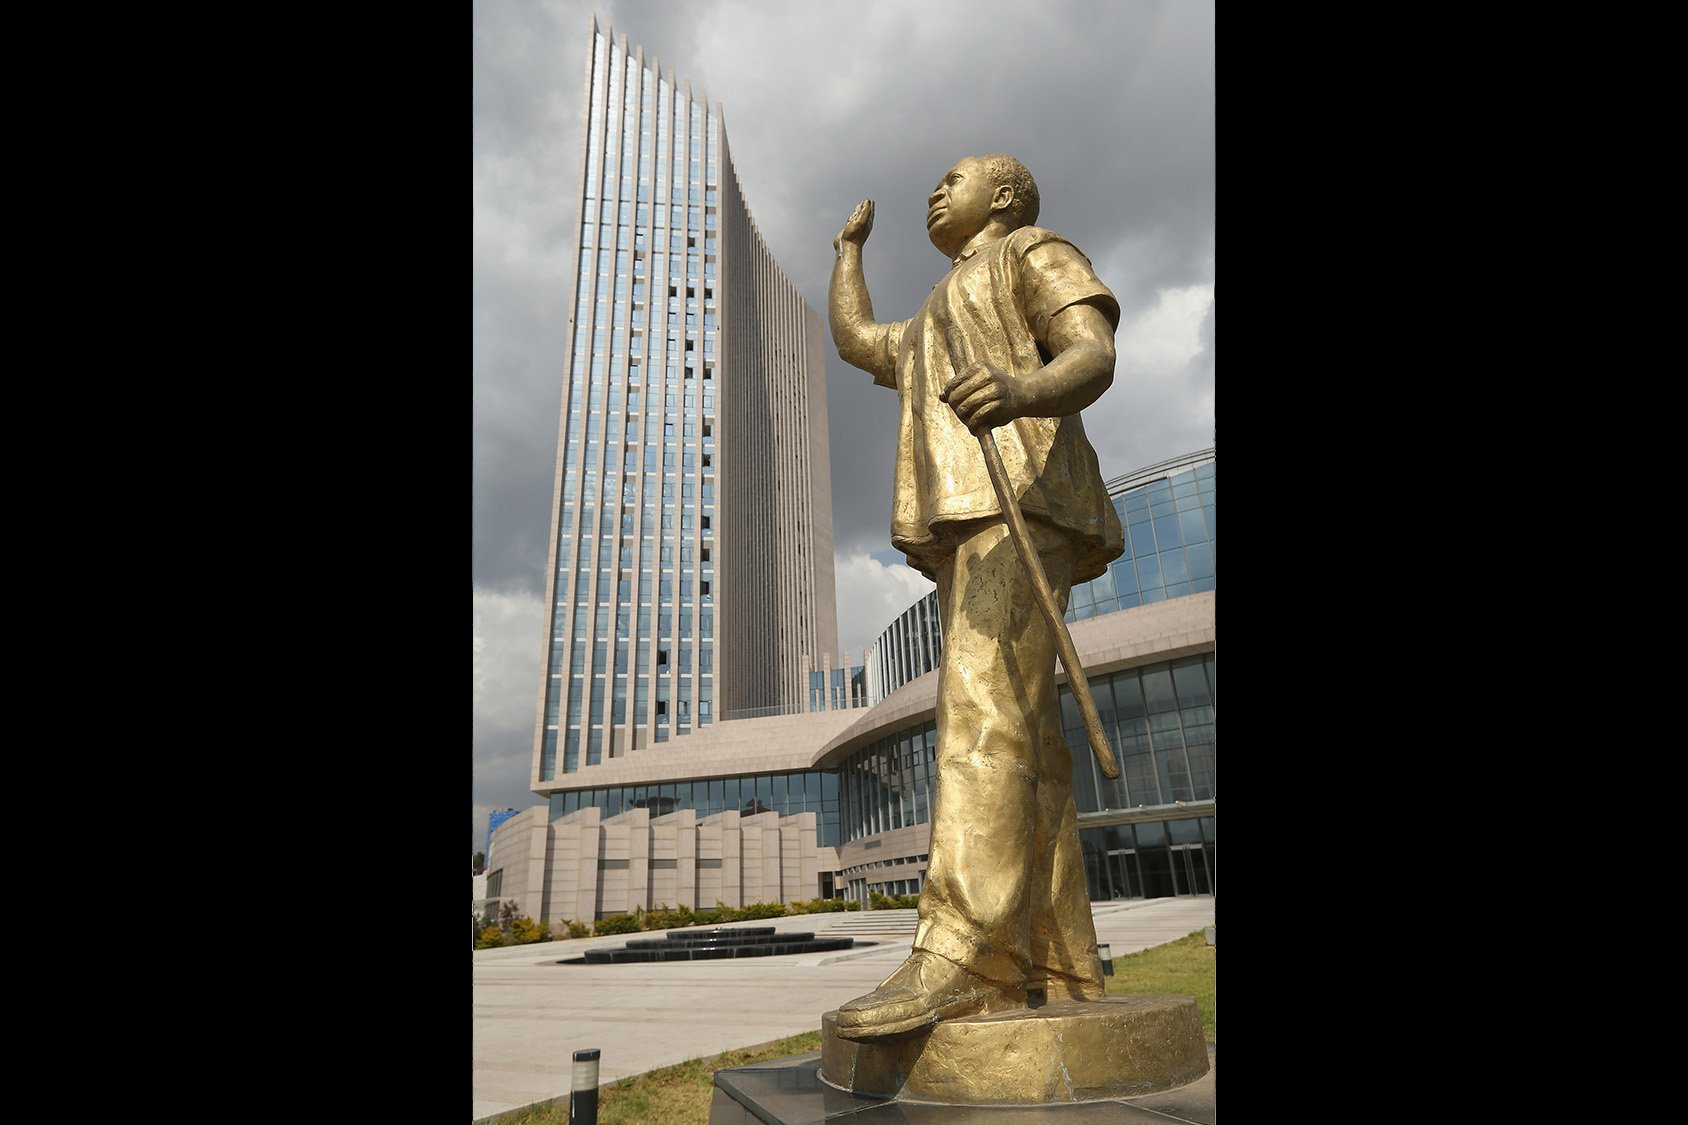 A golden statue of Kwame Nkrumah, seen with his hand raised and holding a staff, stands outside the multi-storied headquarters of the African Union in Addis Ababa, Ethiopia.